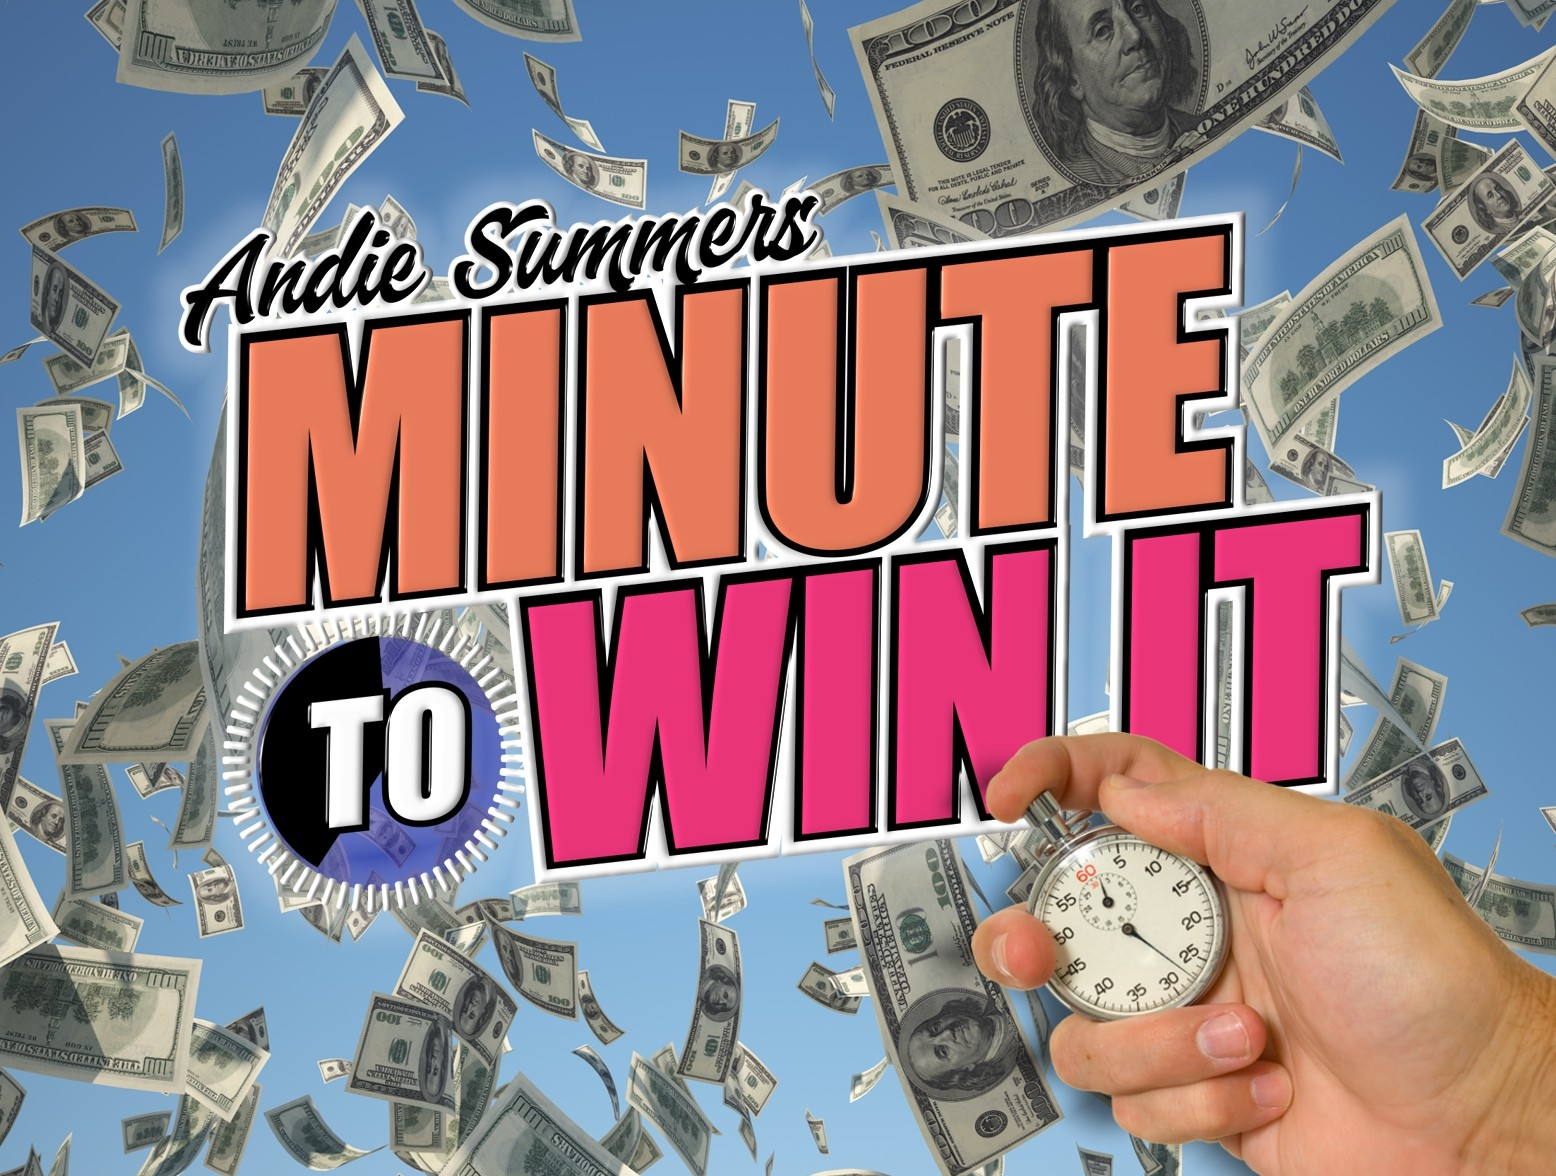 Minute To Win It- Bob from Allentown WINS